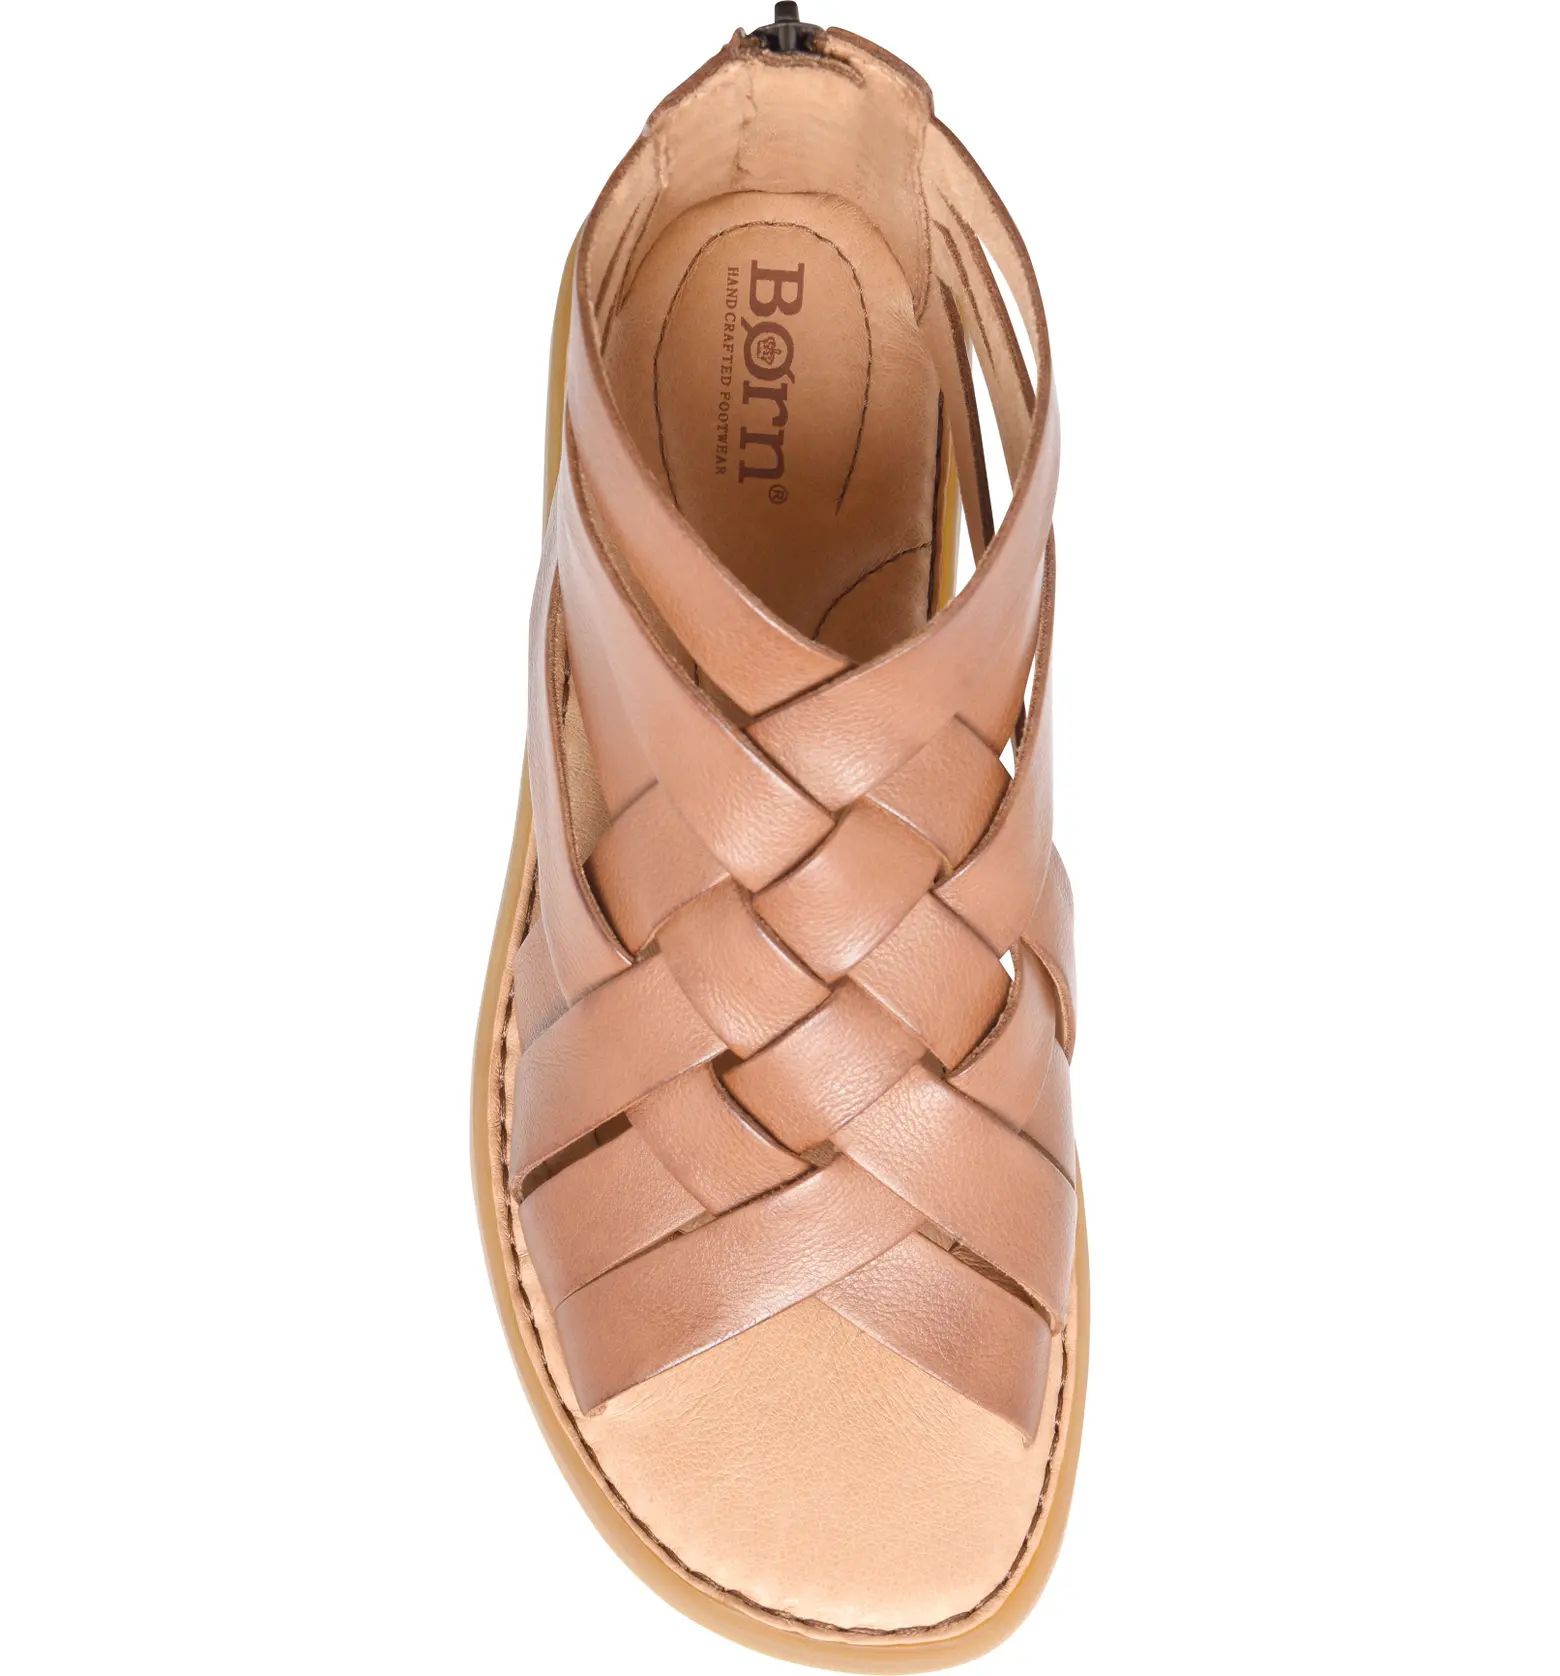 Iwa Woven Leather Sandal | Nordstrom